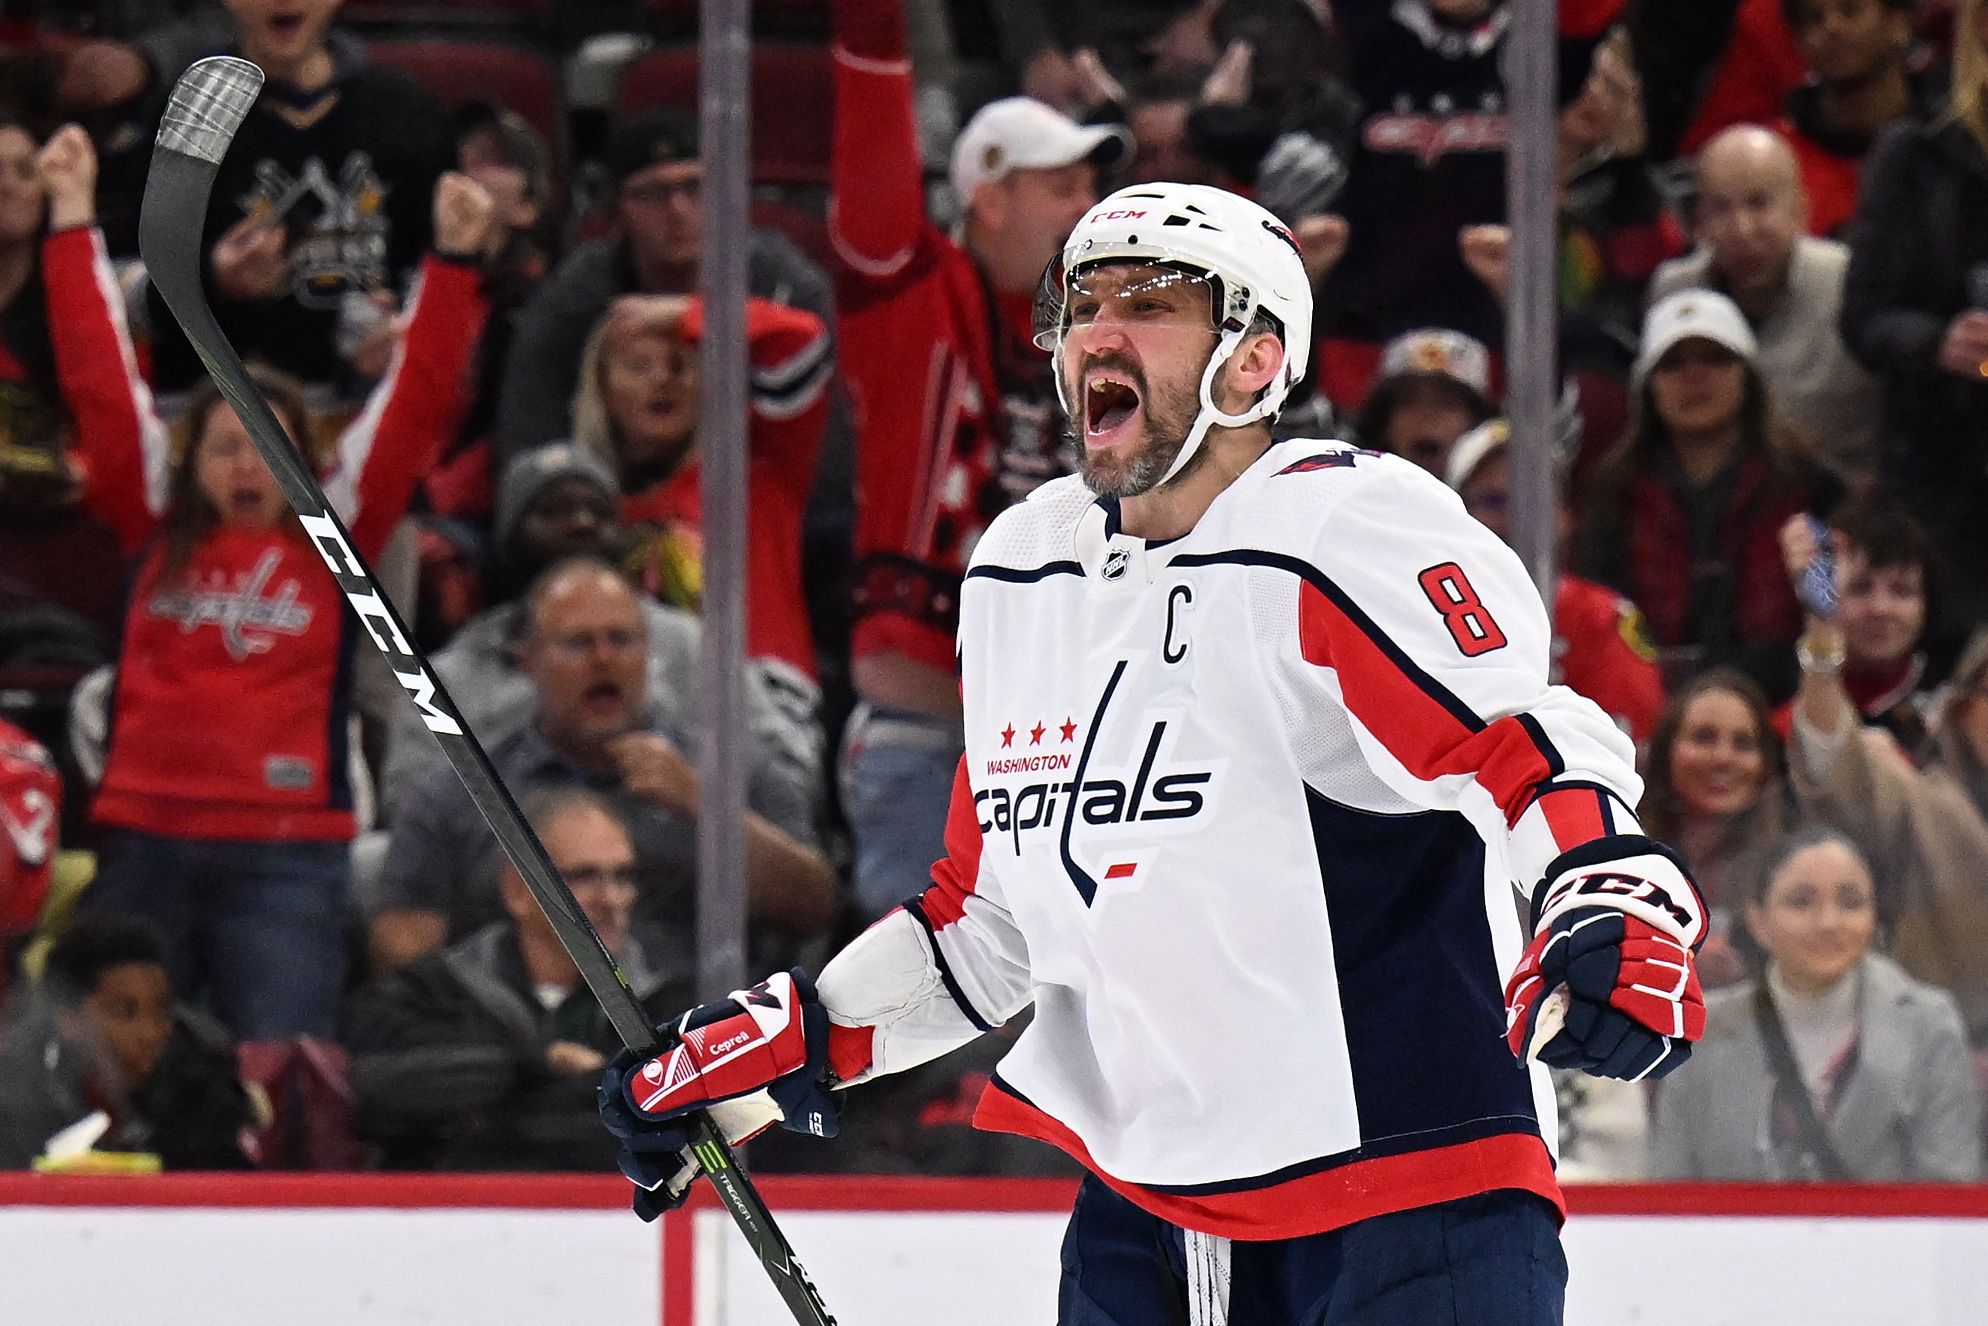 Ovechkin scores 800th goal with hat trick, moves 1 back of Gordie Howe